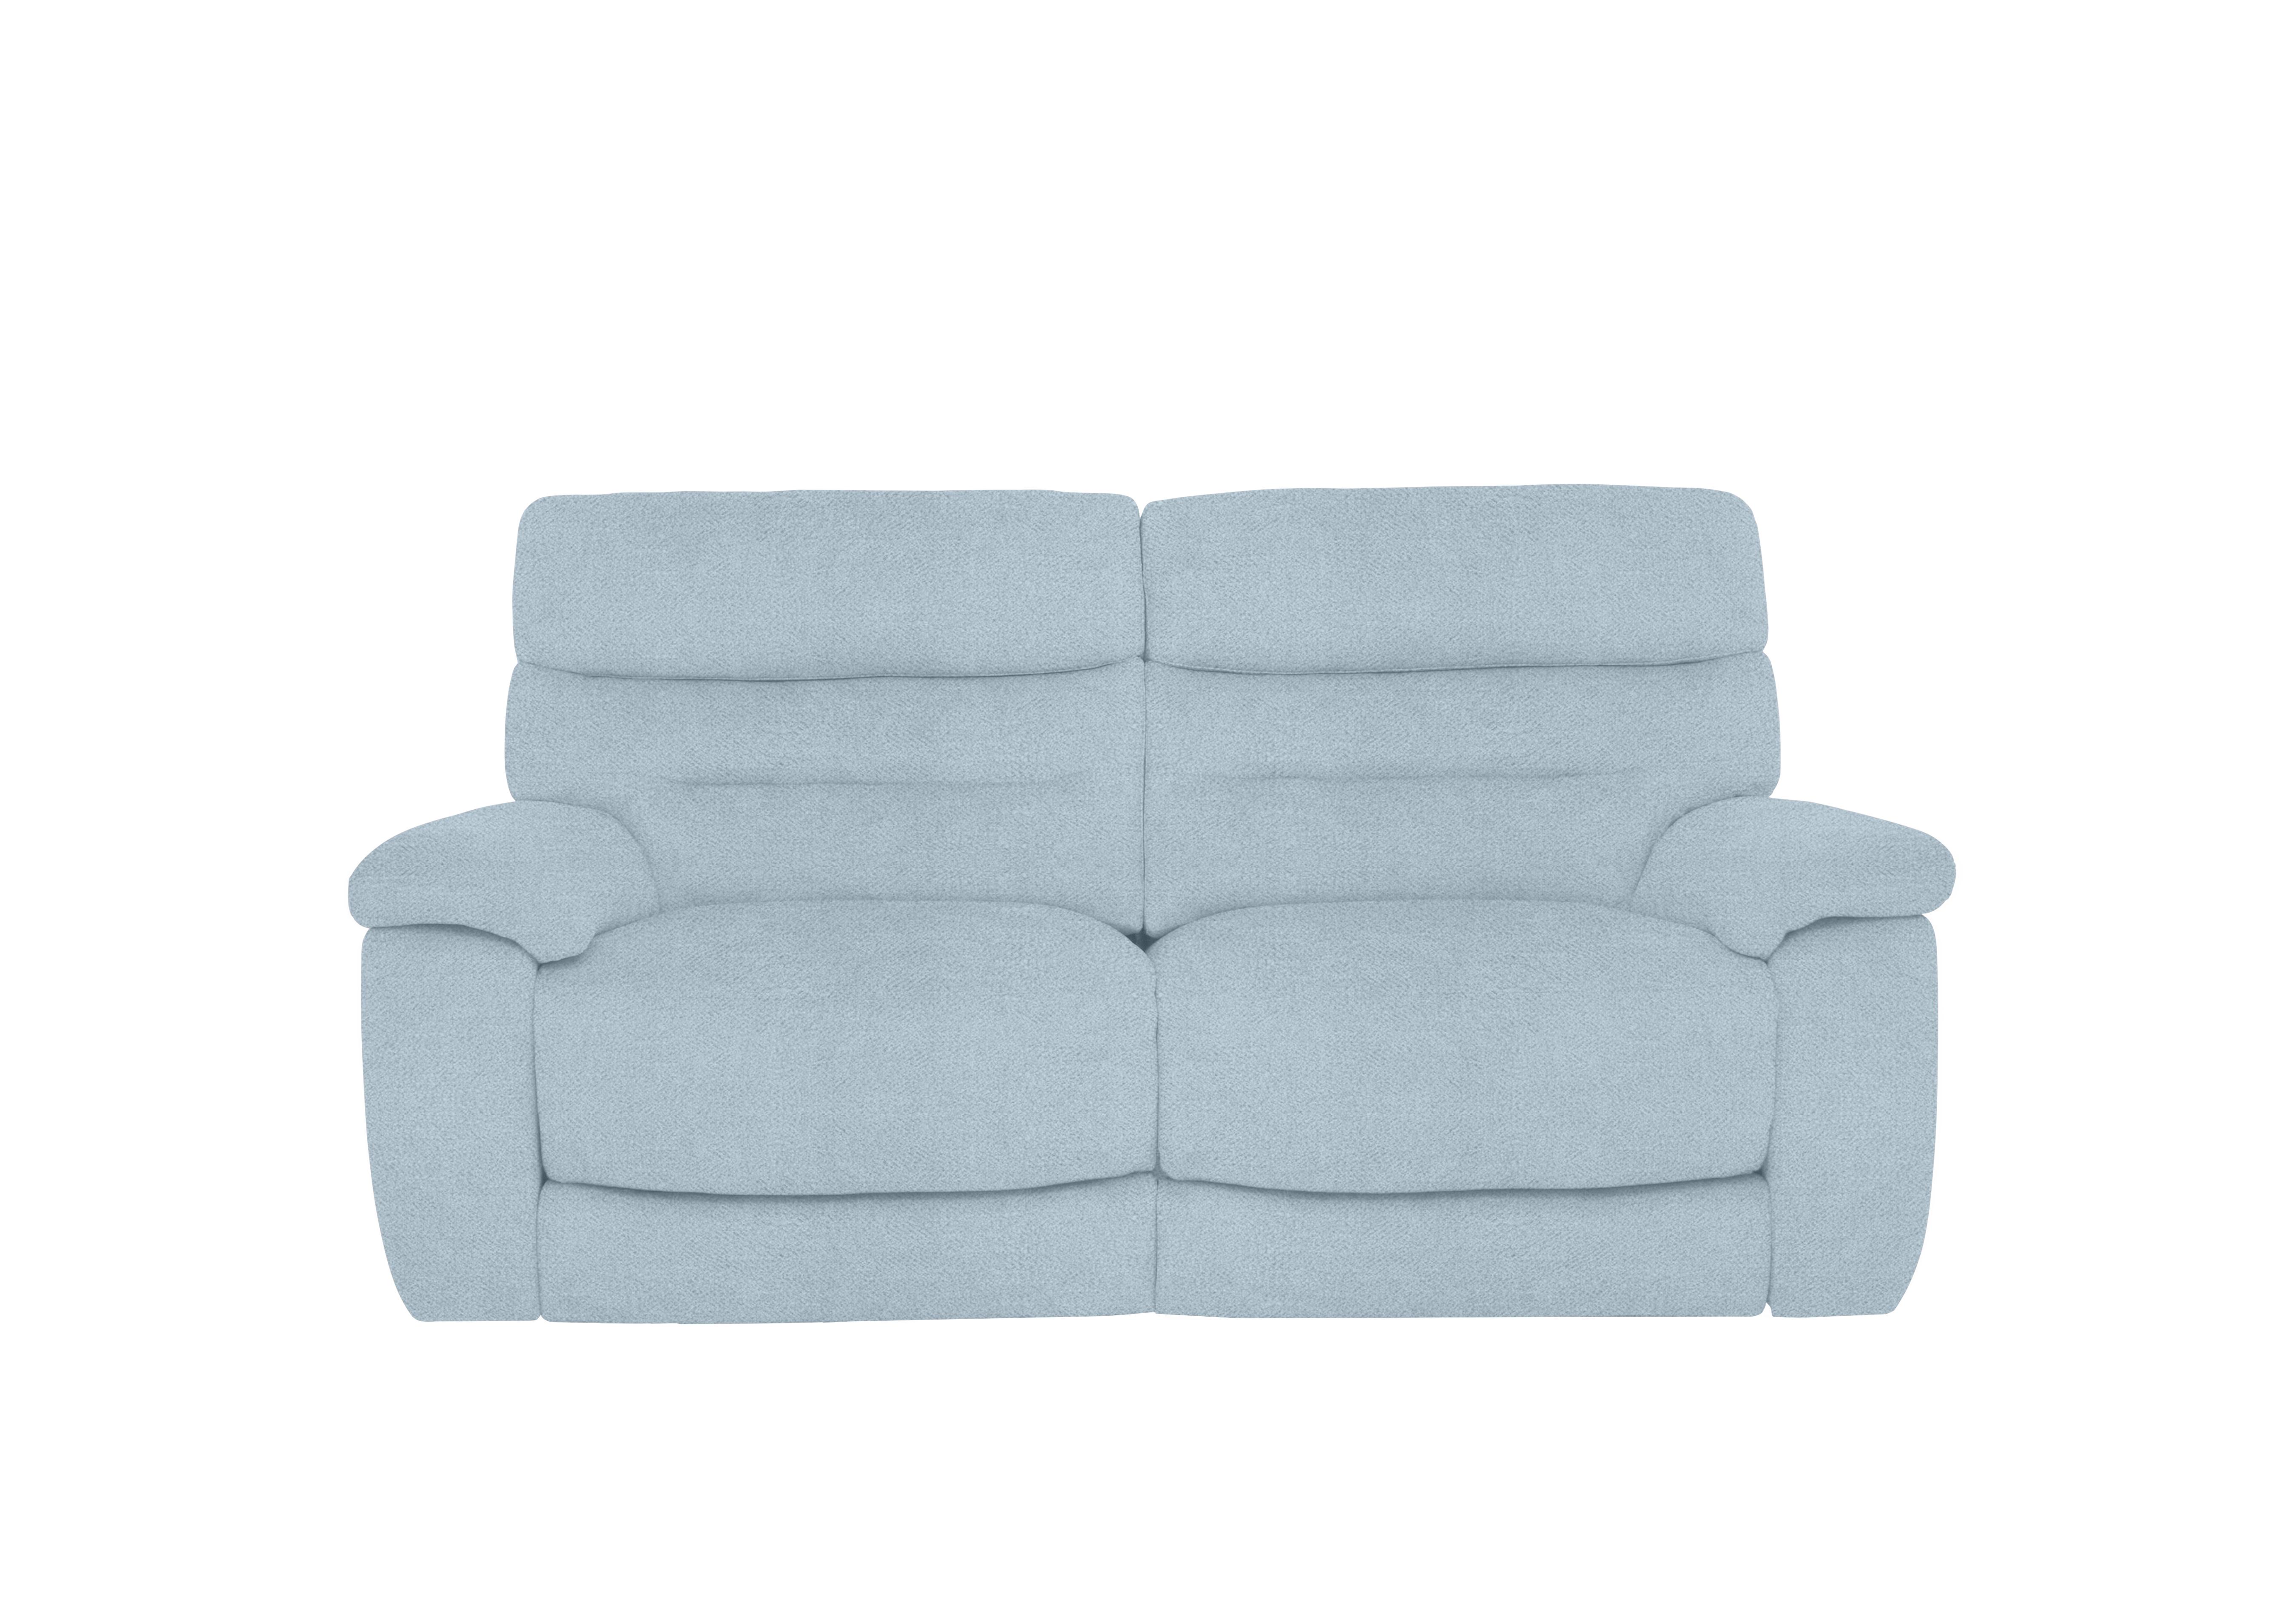 Nimbus 2 Seater Fabric Power Recliner Sofa with Power Headrests in Fab-Meo-R17 Baby Blue on Furniture Village